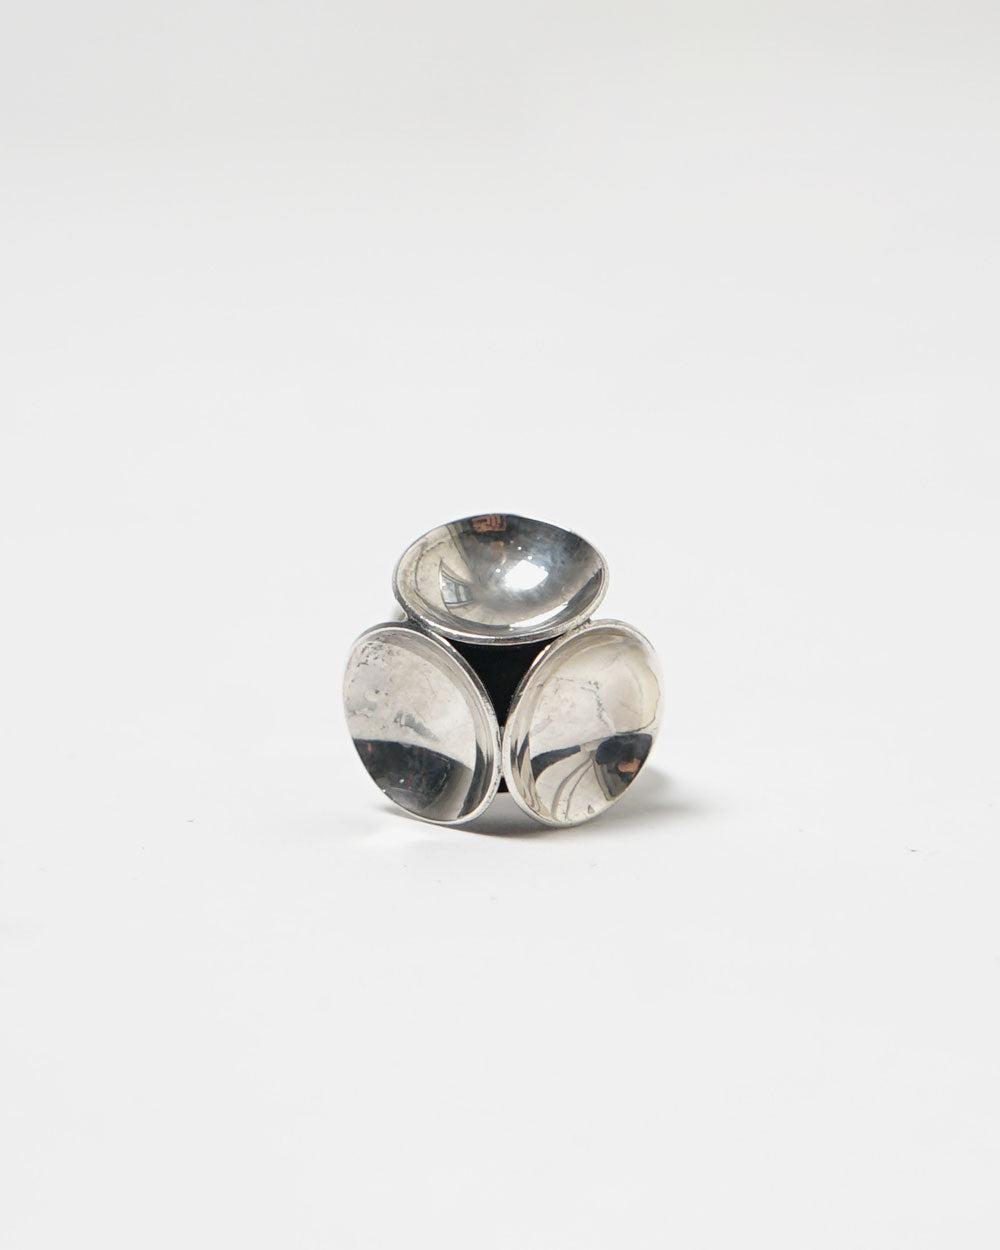 Silver Ring / size: 7.75